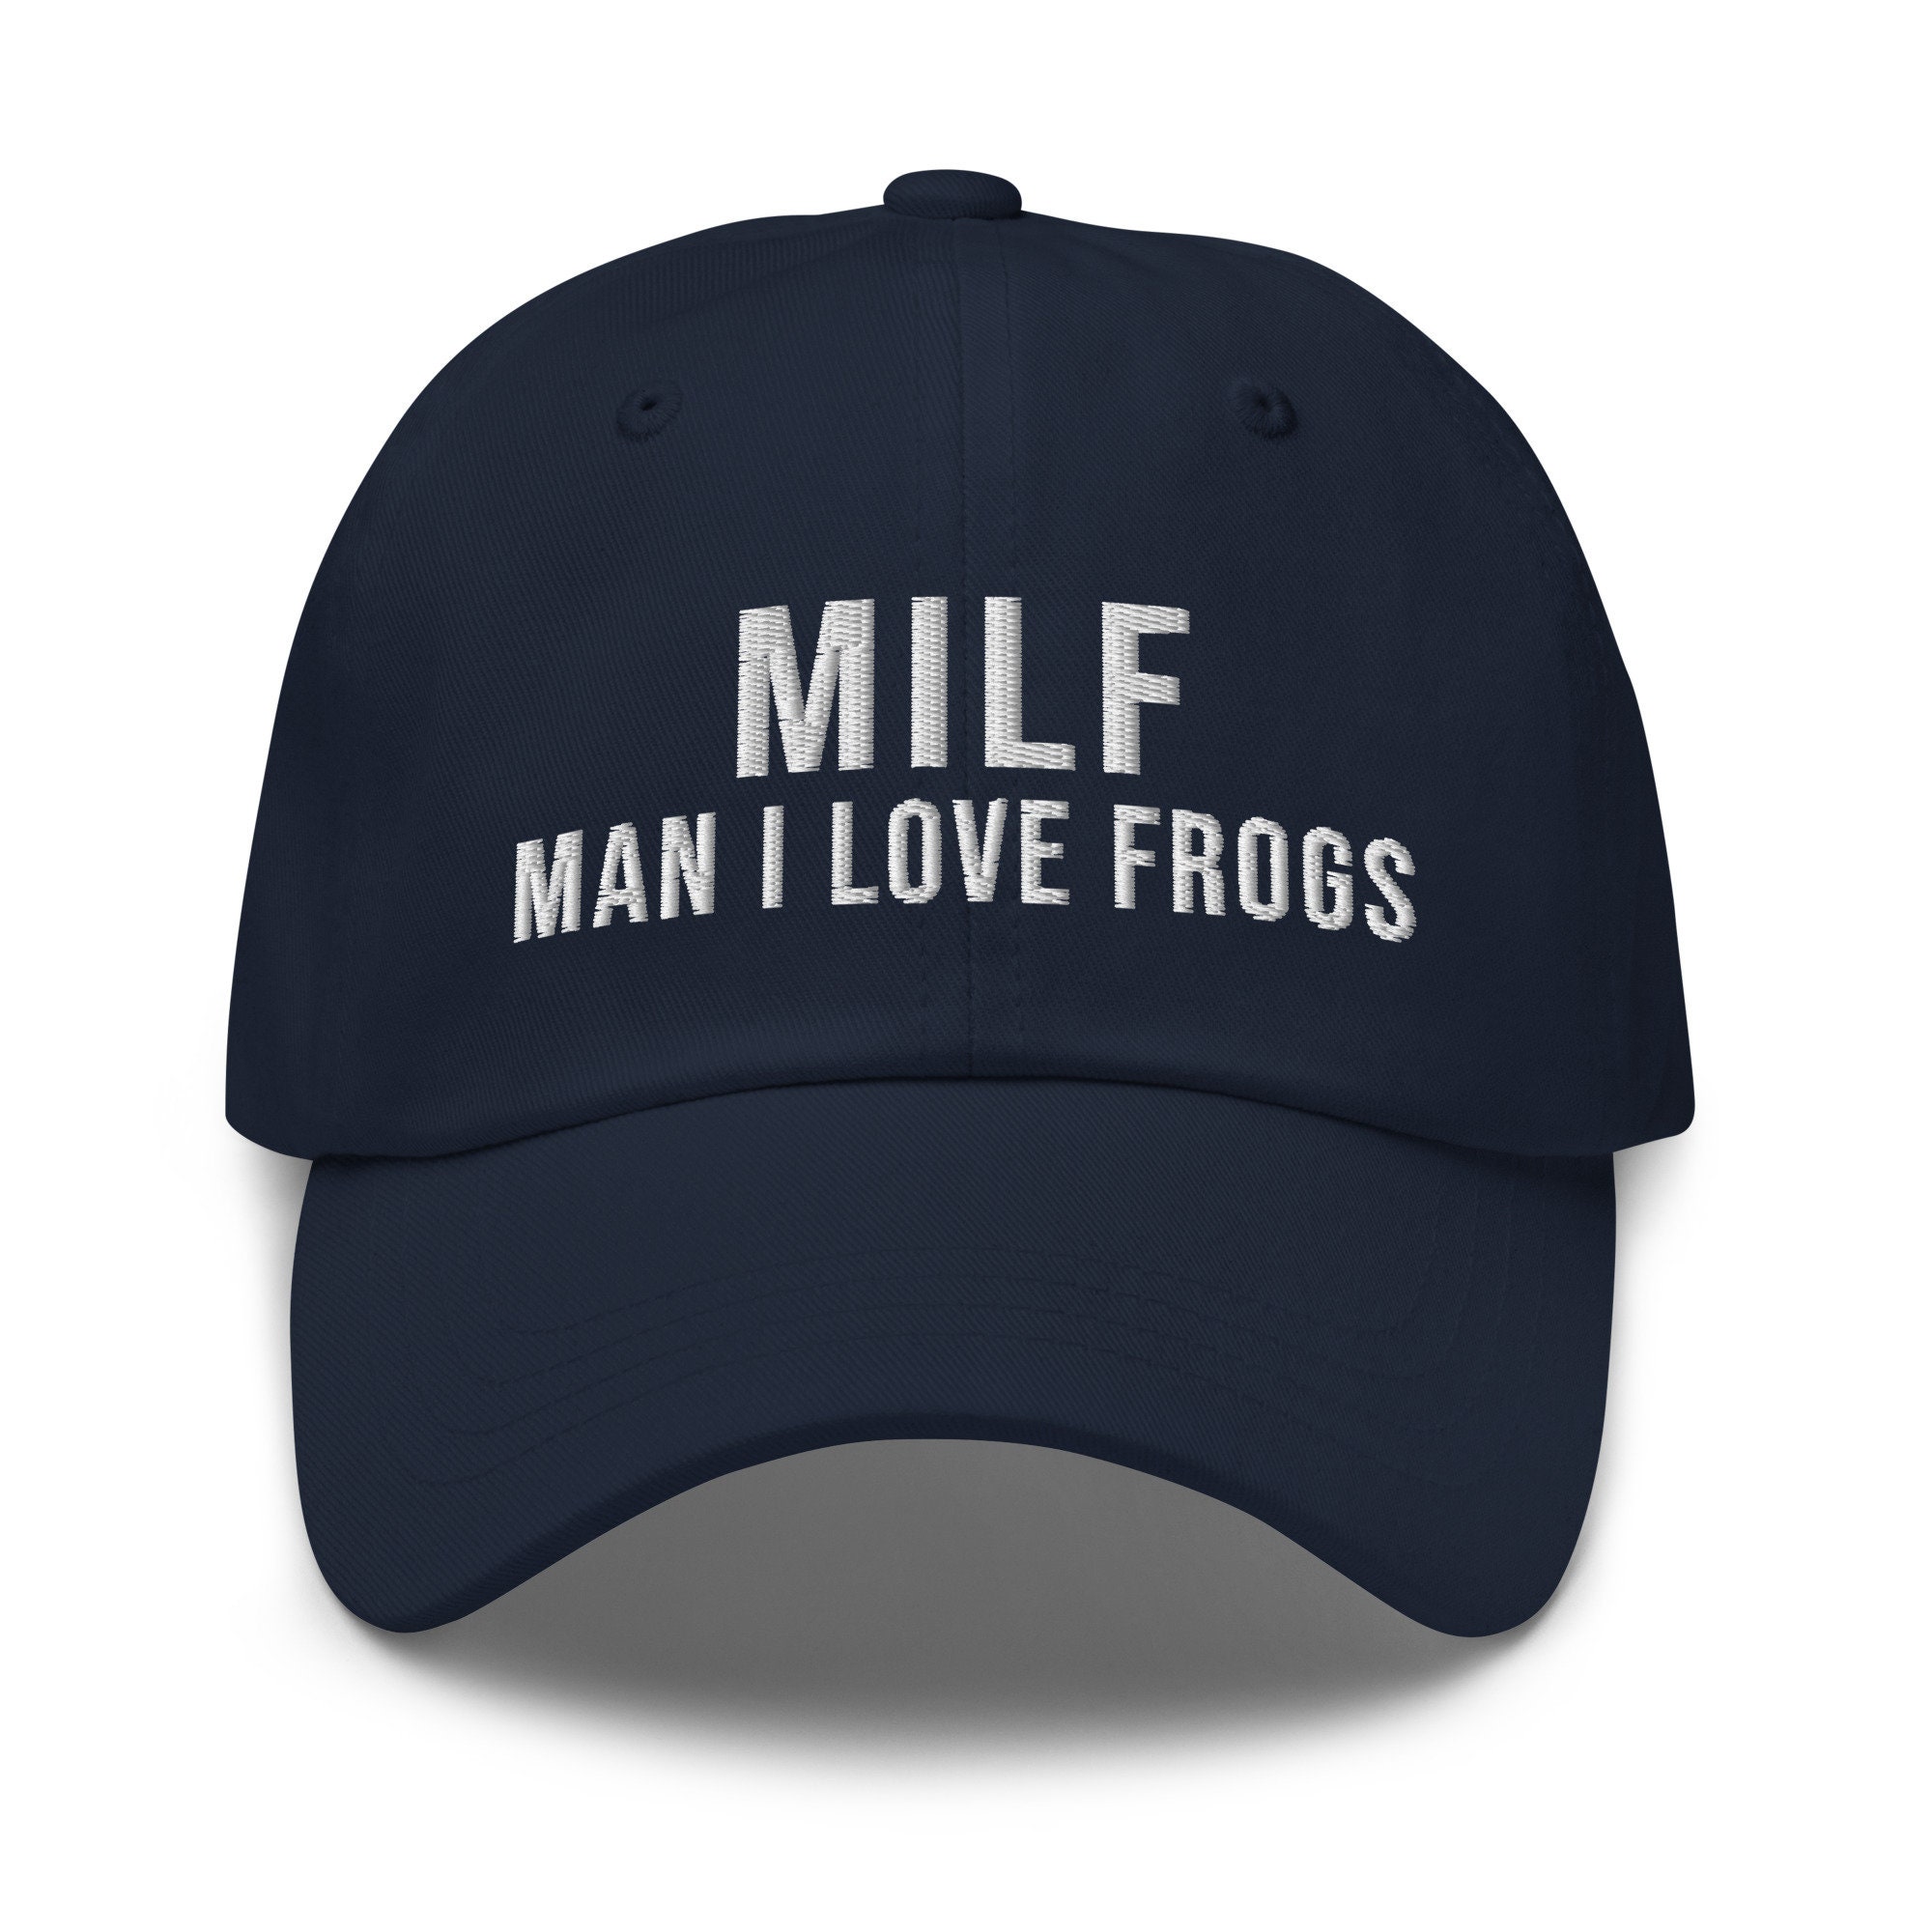 MILF Man I Love Frogs, Embroidered Dad Hat, Funny Frog Hat, Frog